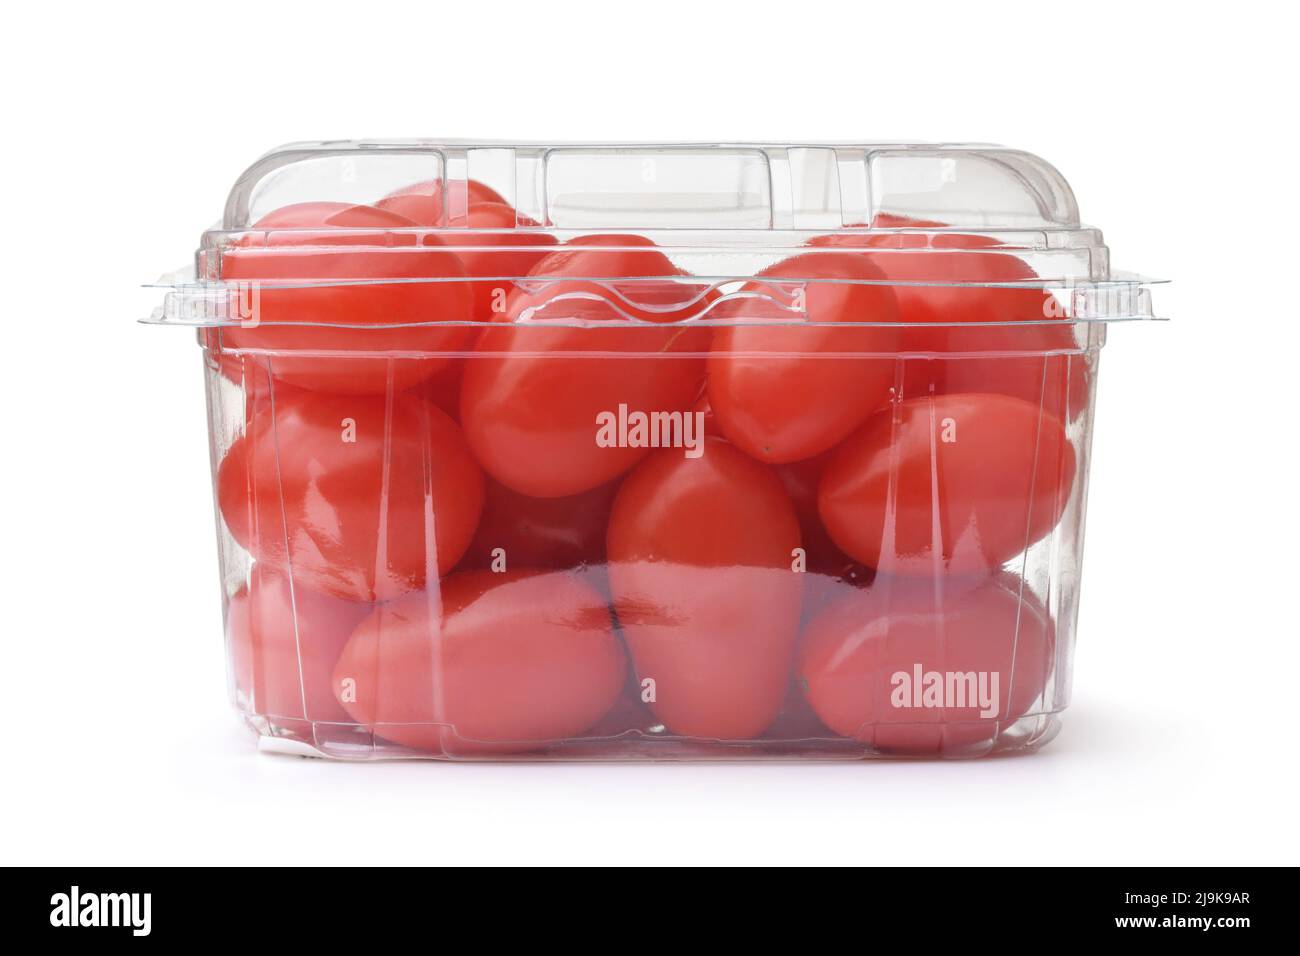 Ripe plum tomatoes in clear plastic container isolated on white Stock Photo